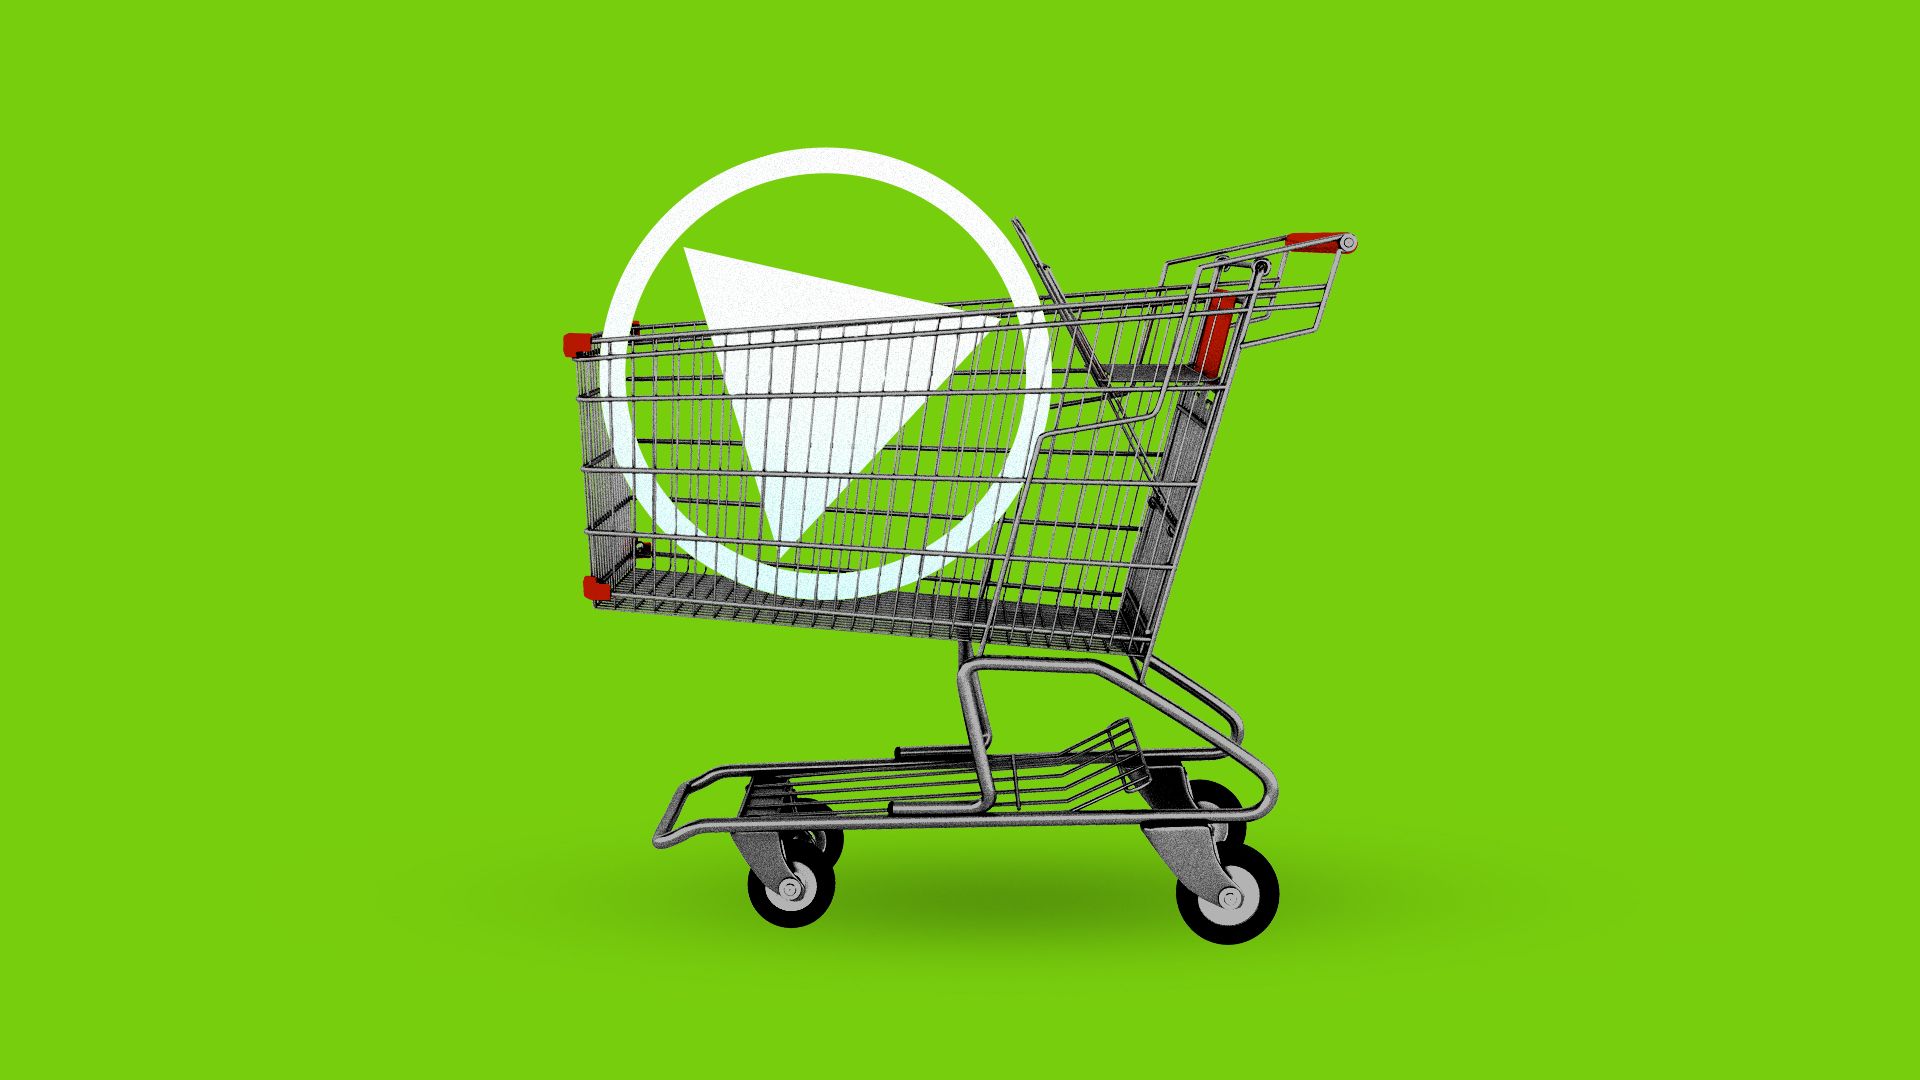 A shopping cart loaded with a giant "play" button like those on web videos 